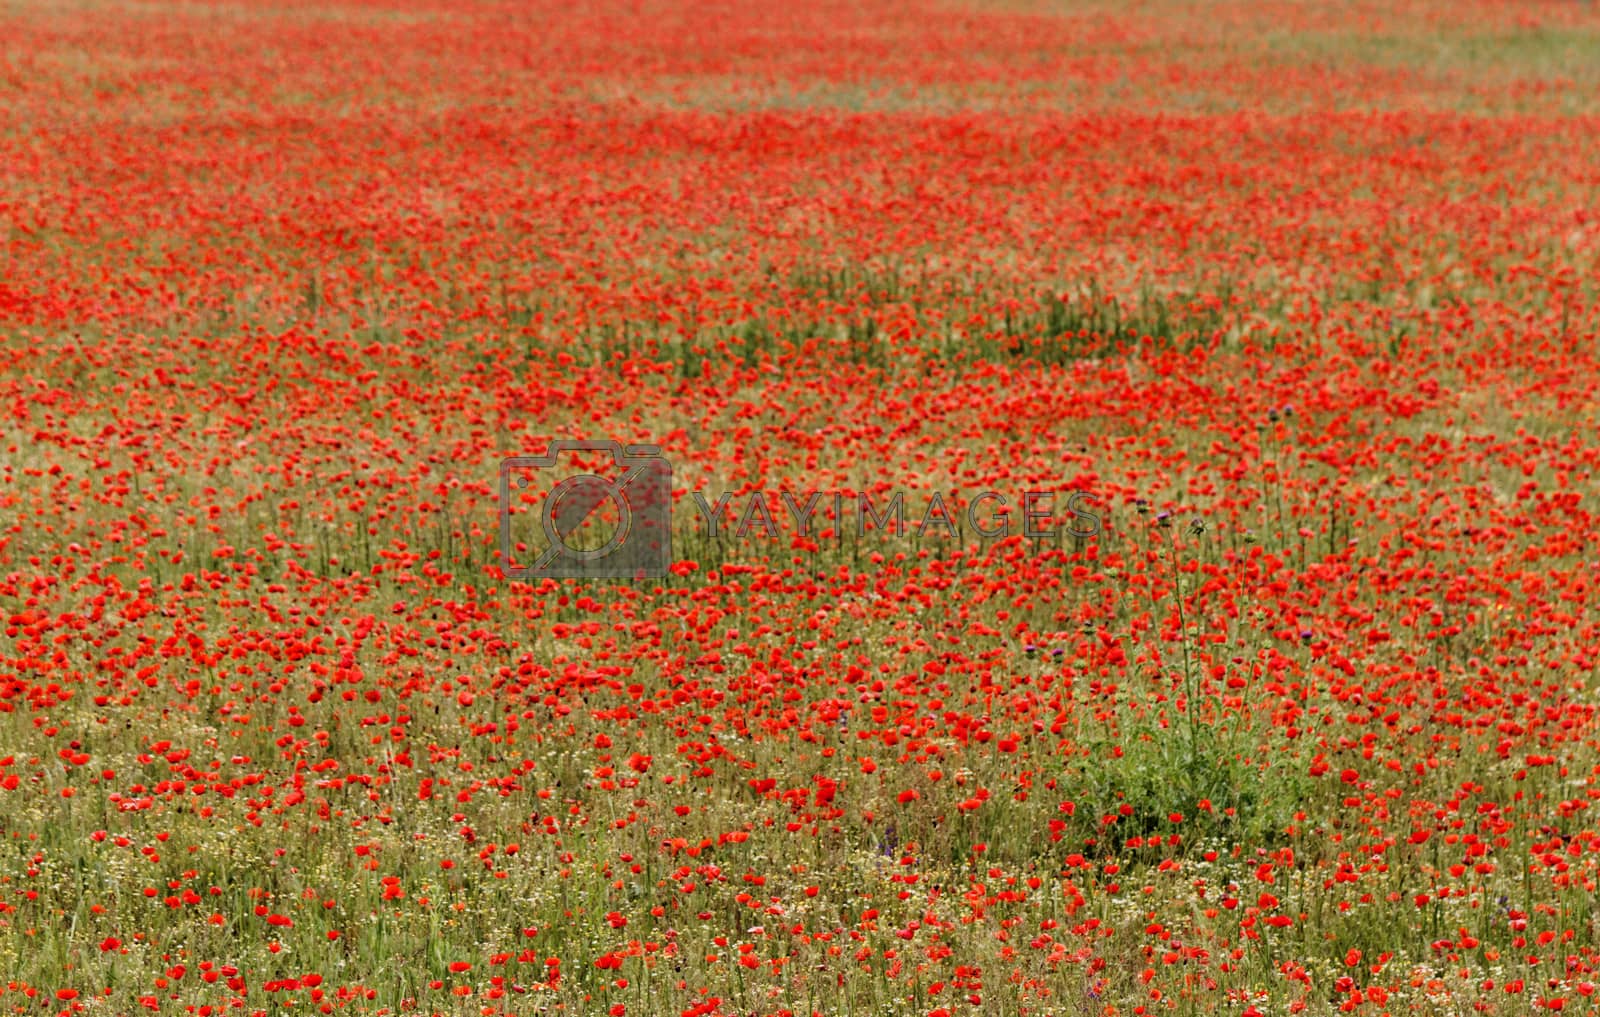 Royalty free image of Red poppies by Nneirda